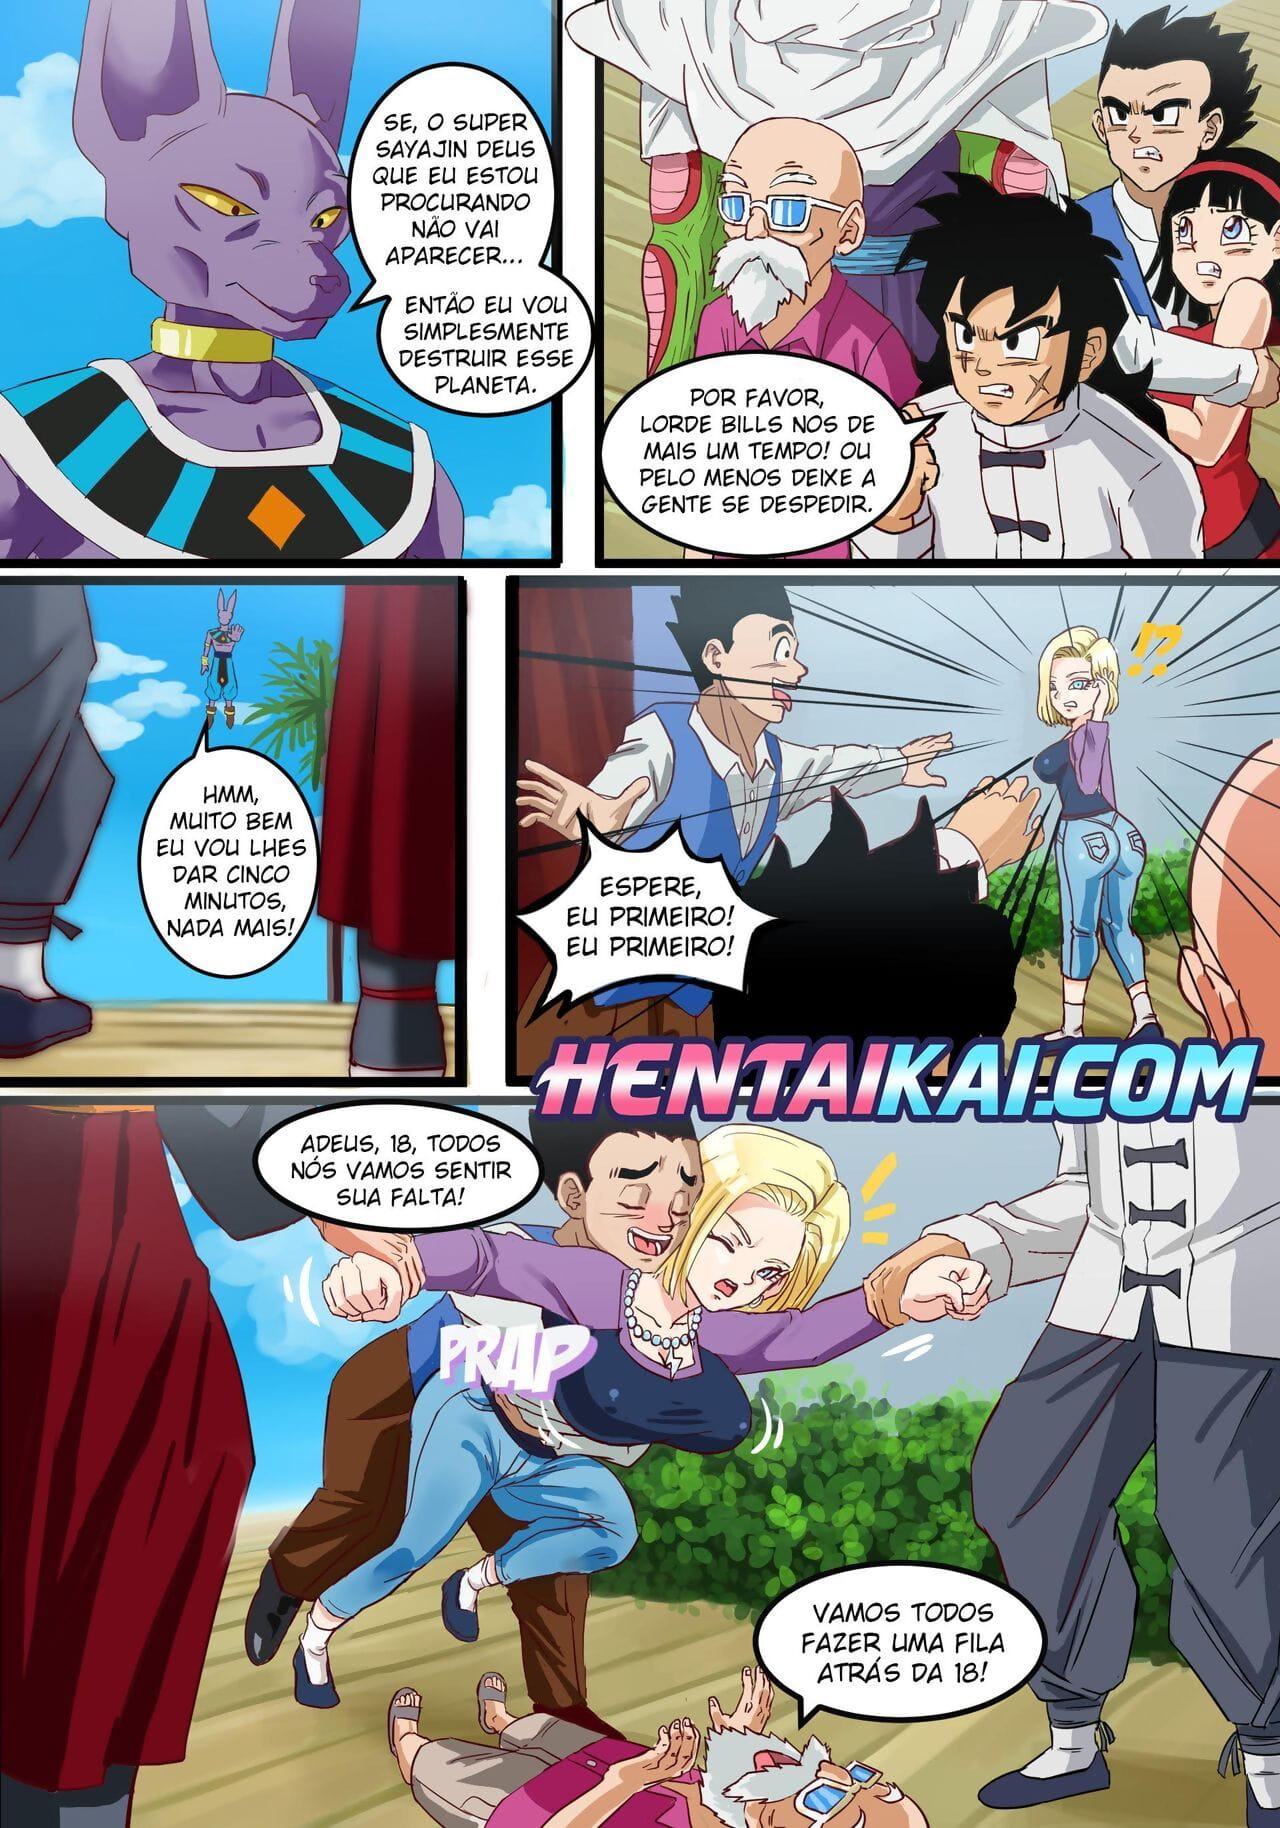 Android 18 - The Goddess Wife page 1